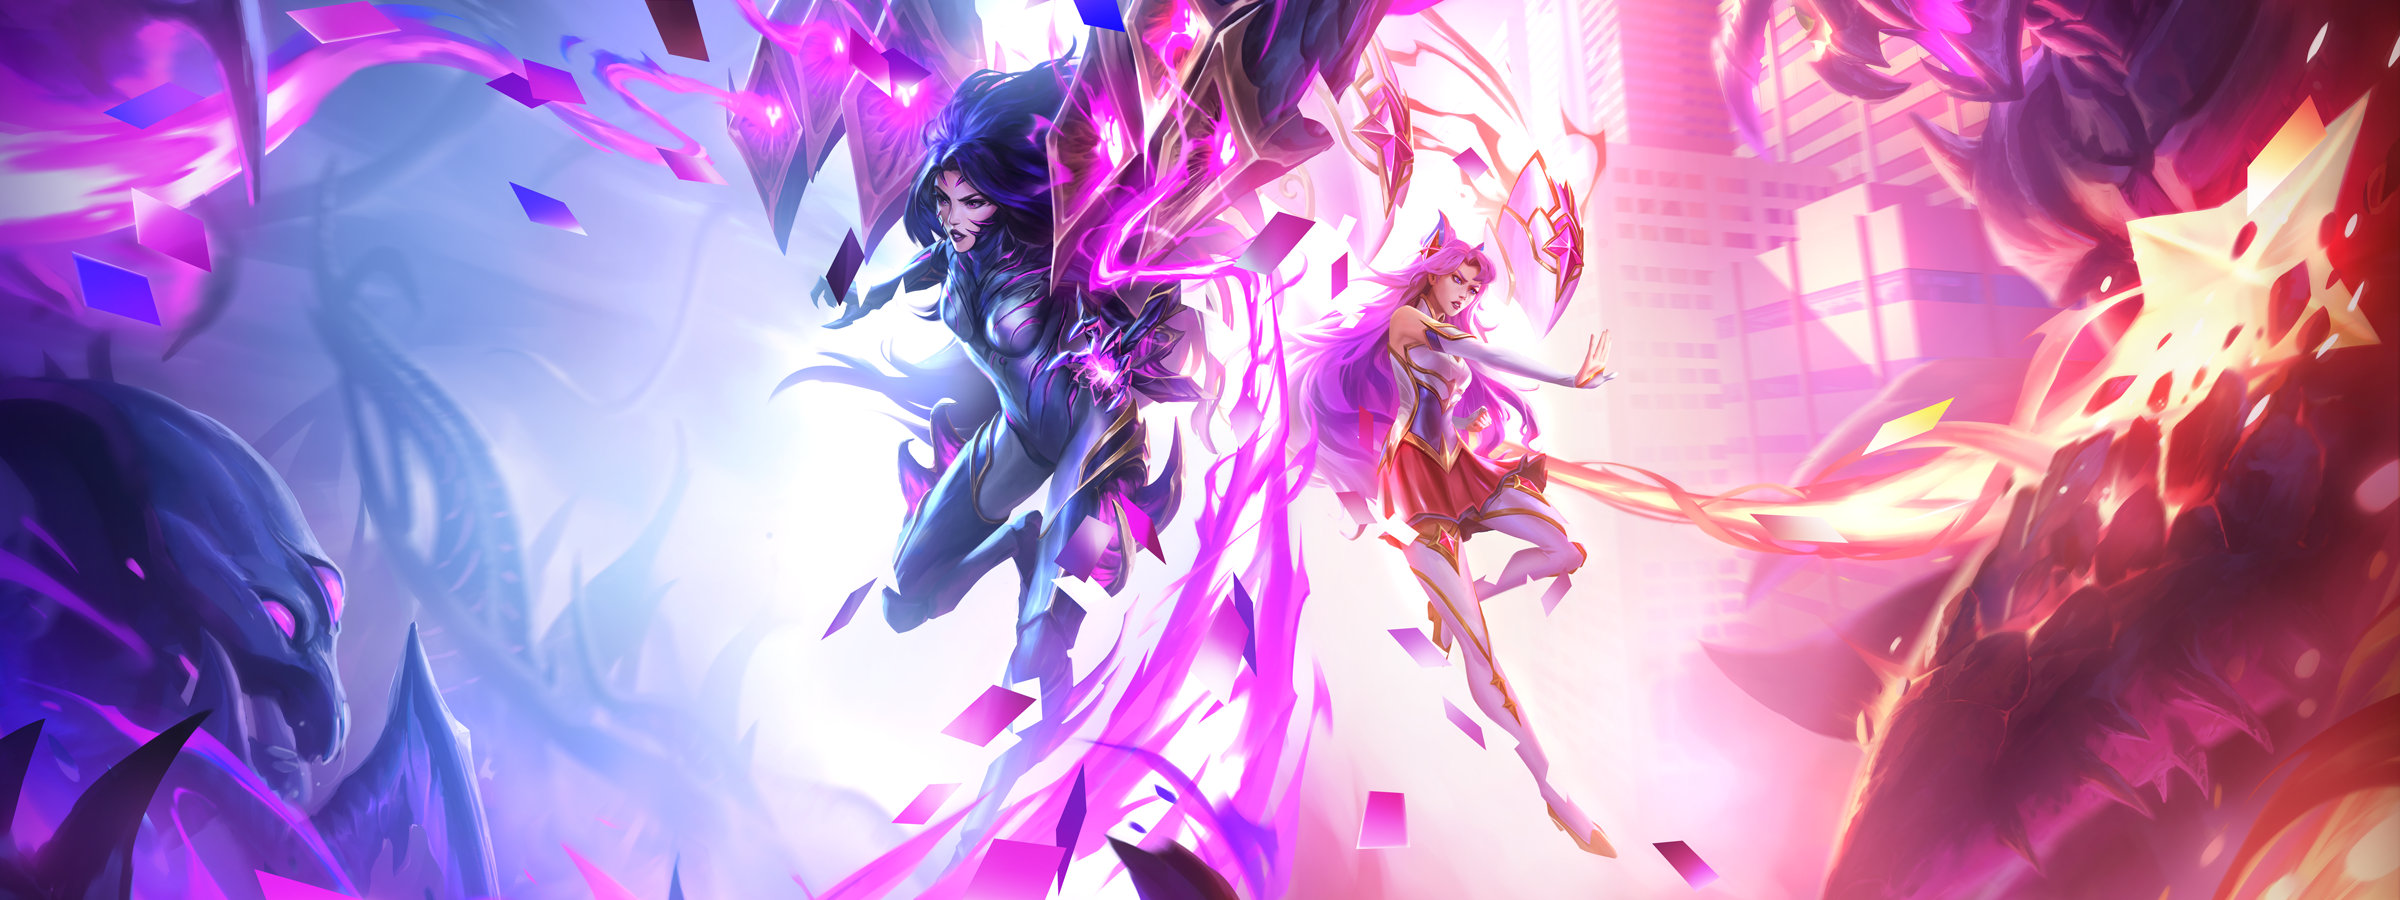 League Of Legends Star Guardian Video Games Video Game Art Video Game Characters 2400x900